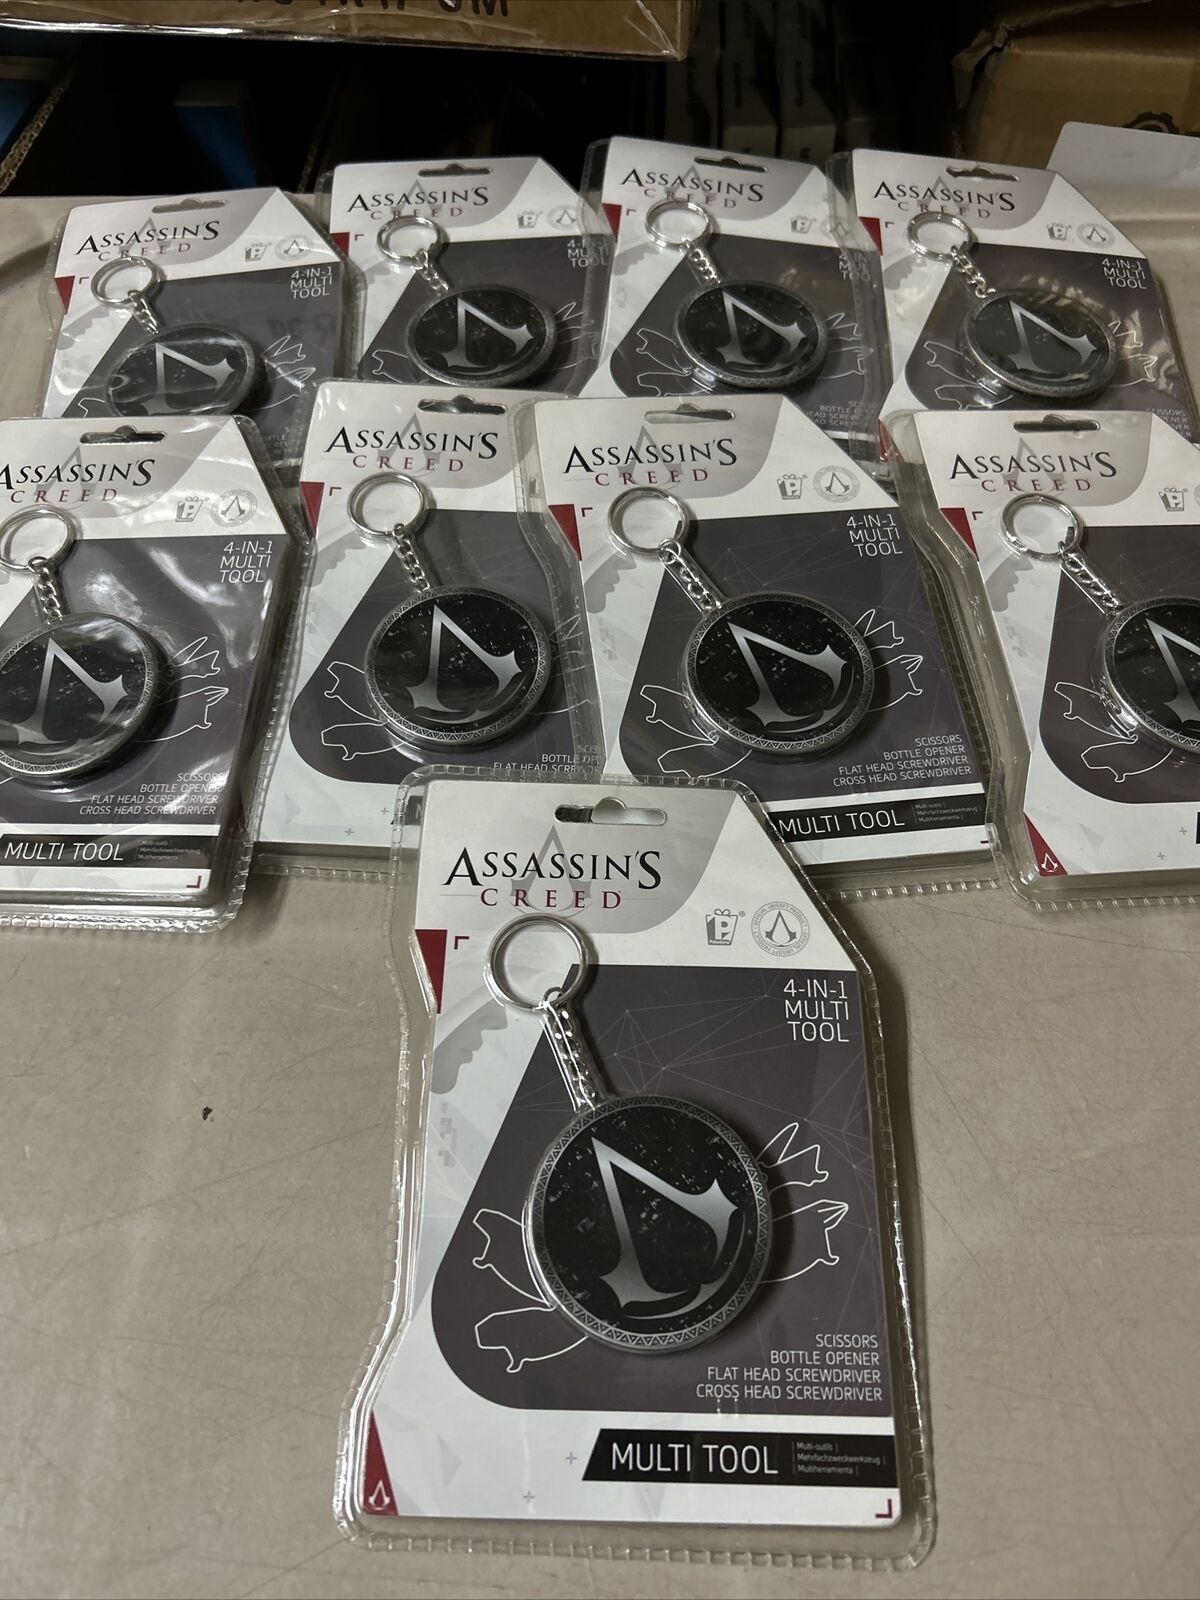 Assassin\'s Creed 4-in-1 Multi Tool ***BRAND NEW*** FACTORY SEALED***